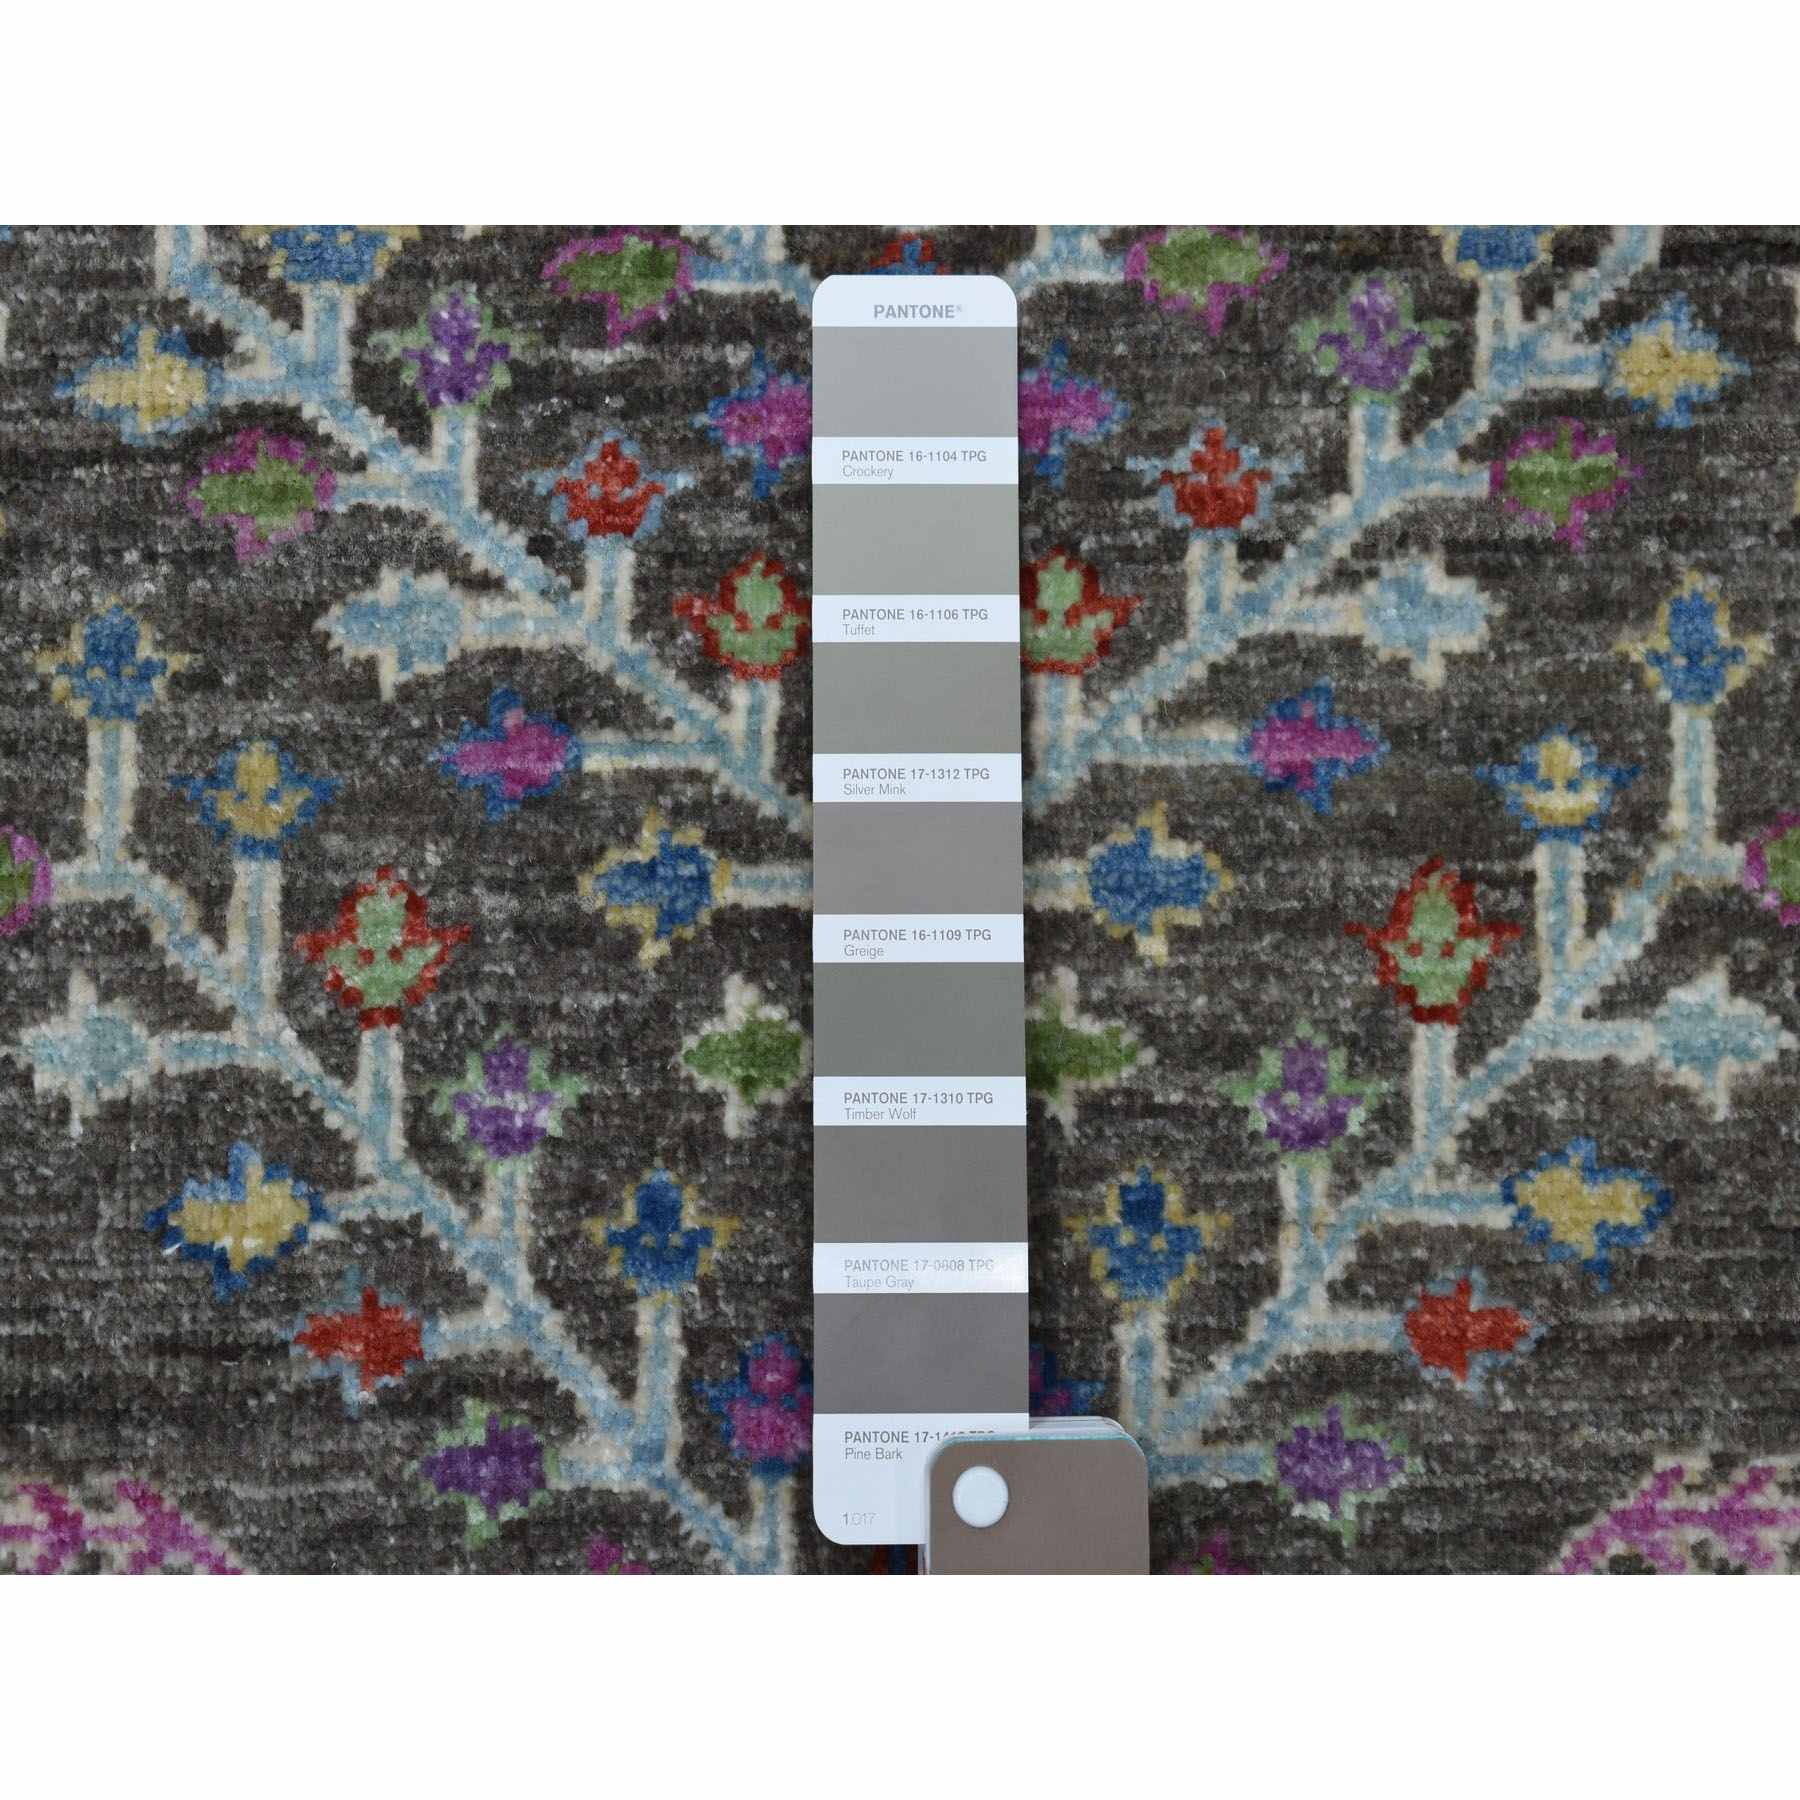 Transitional-Hand-Knotted-Rug-275525